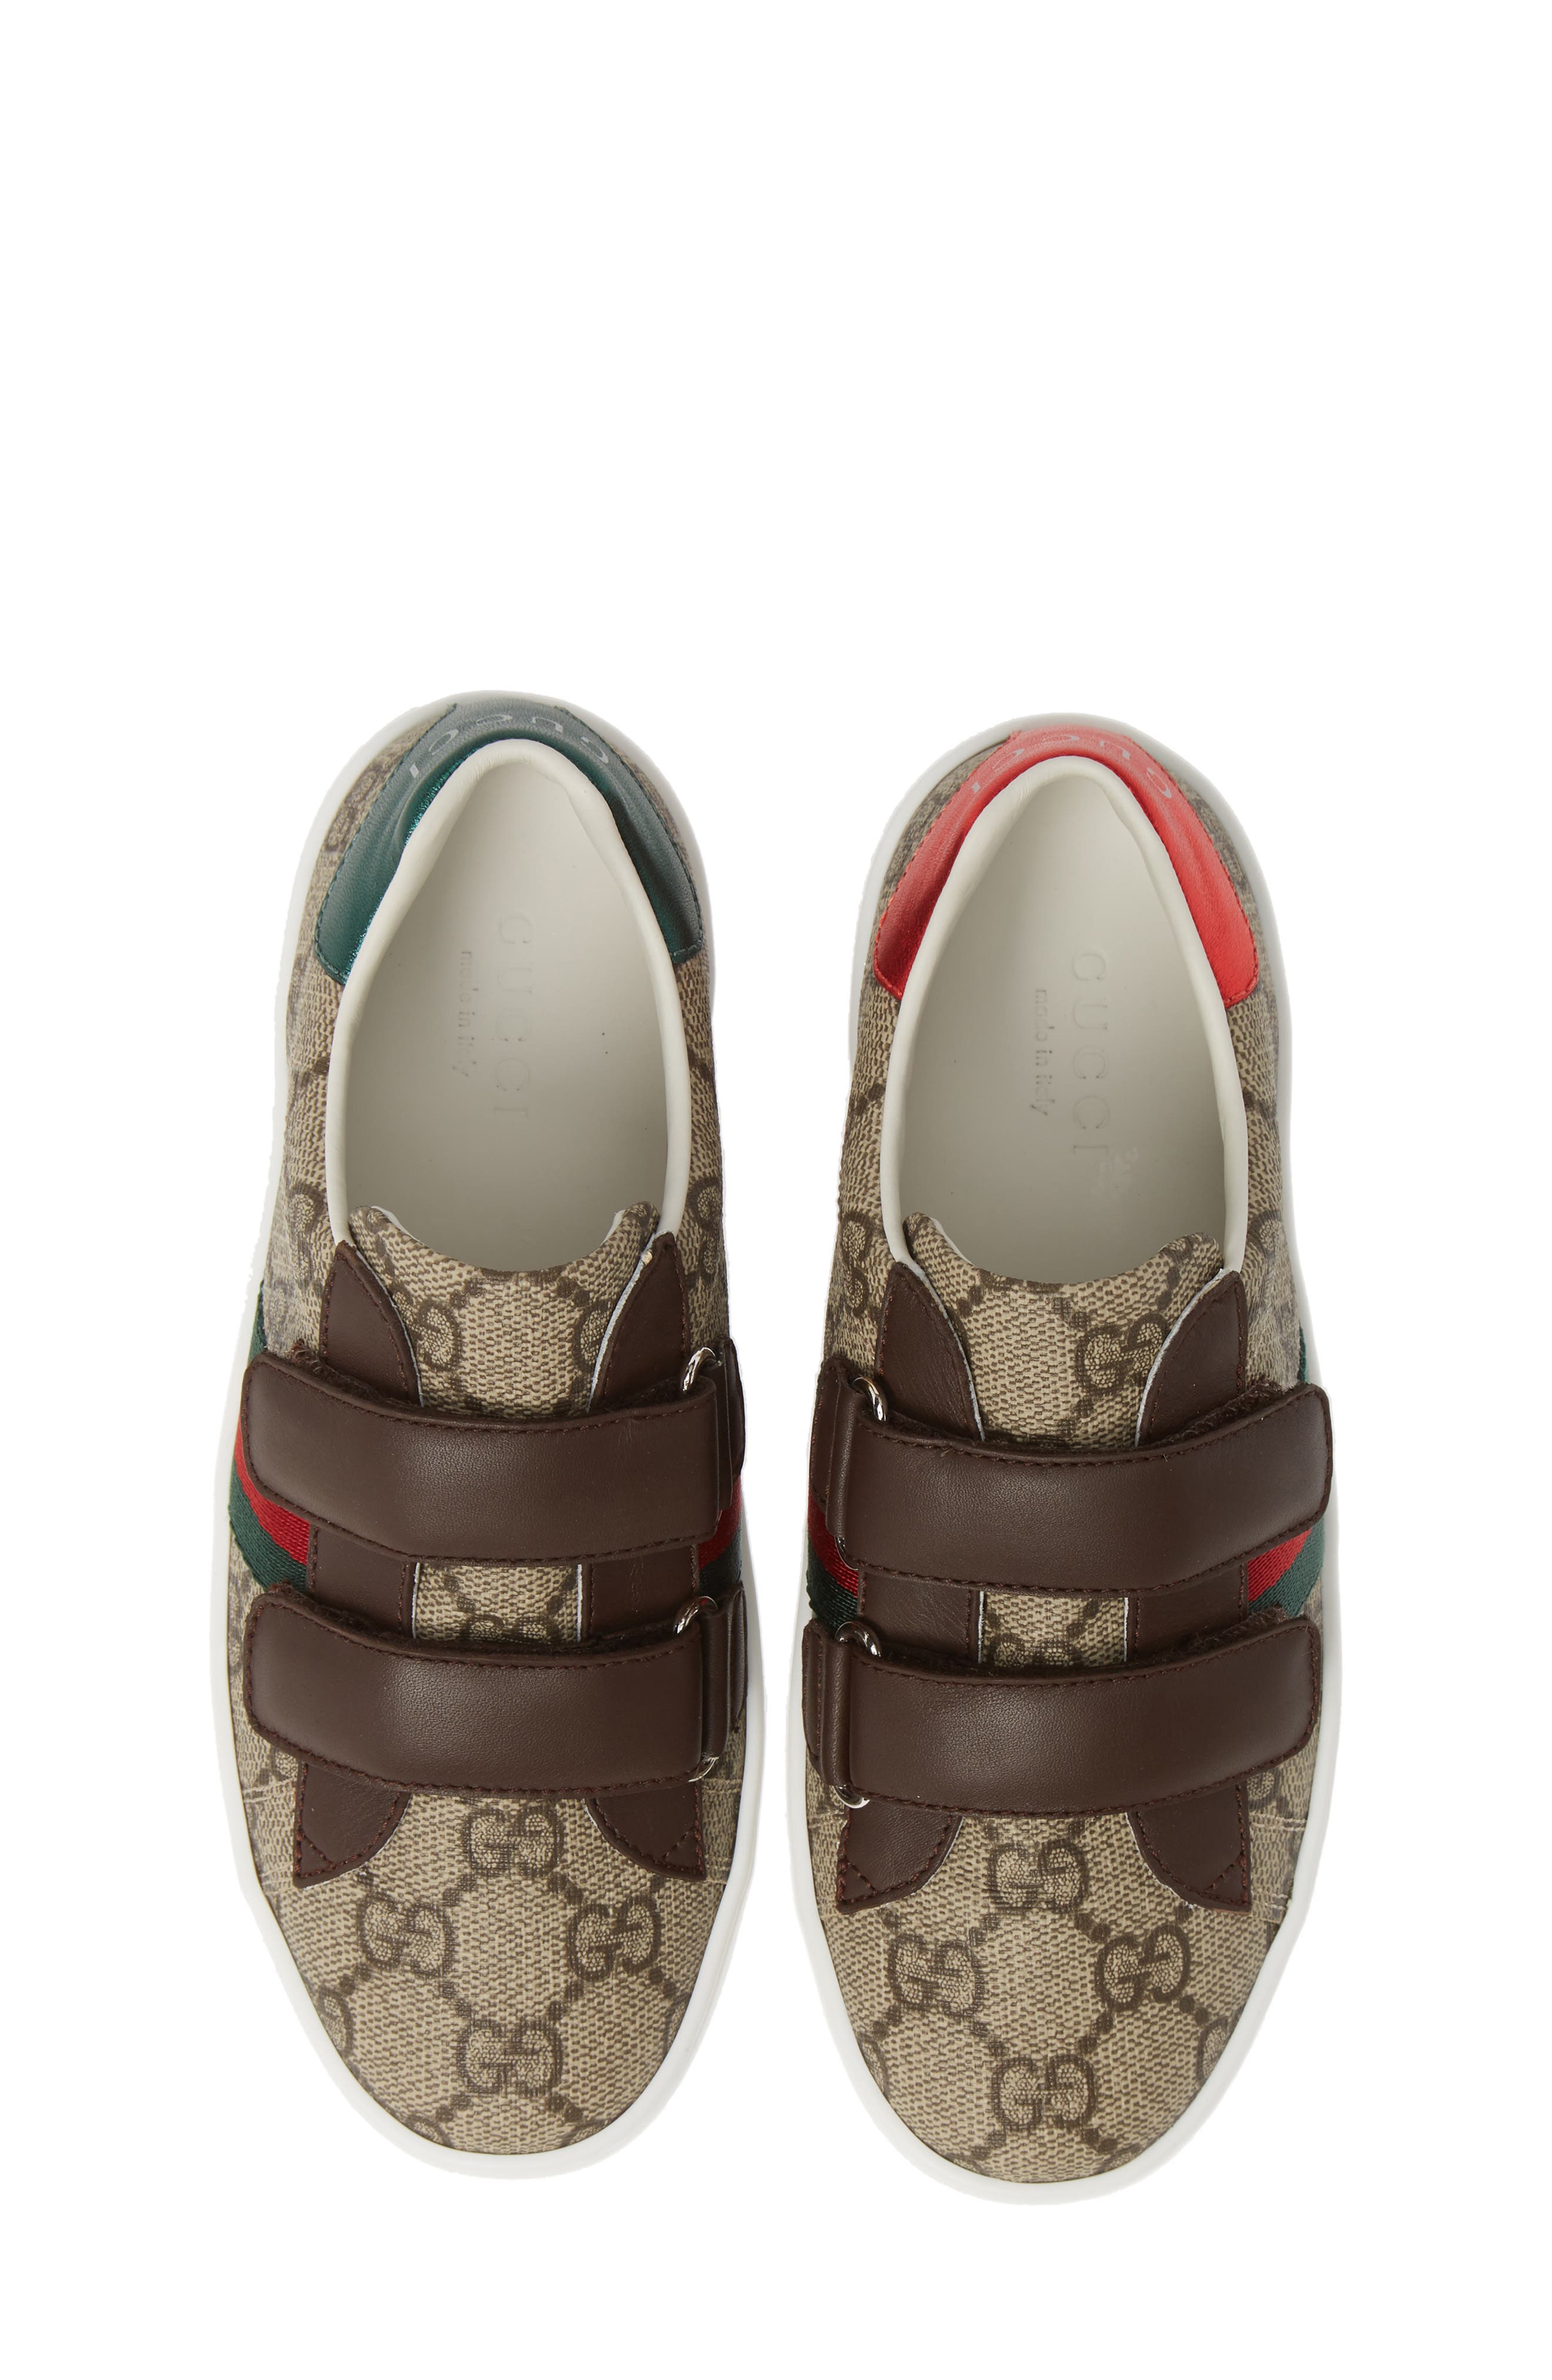 gucci shoes nordstrom price